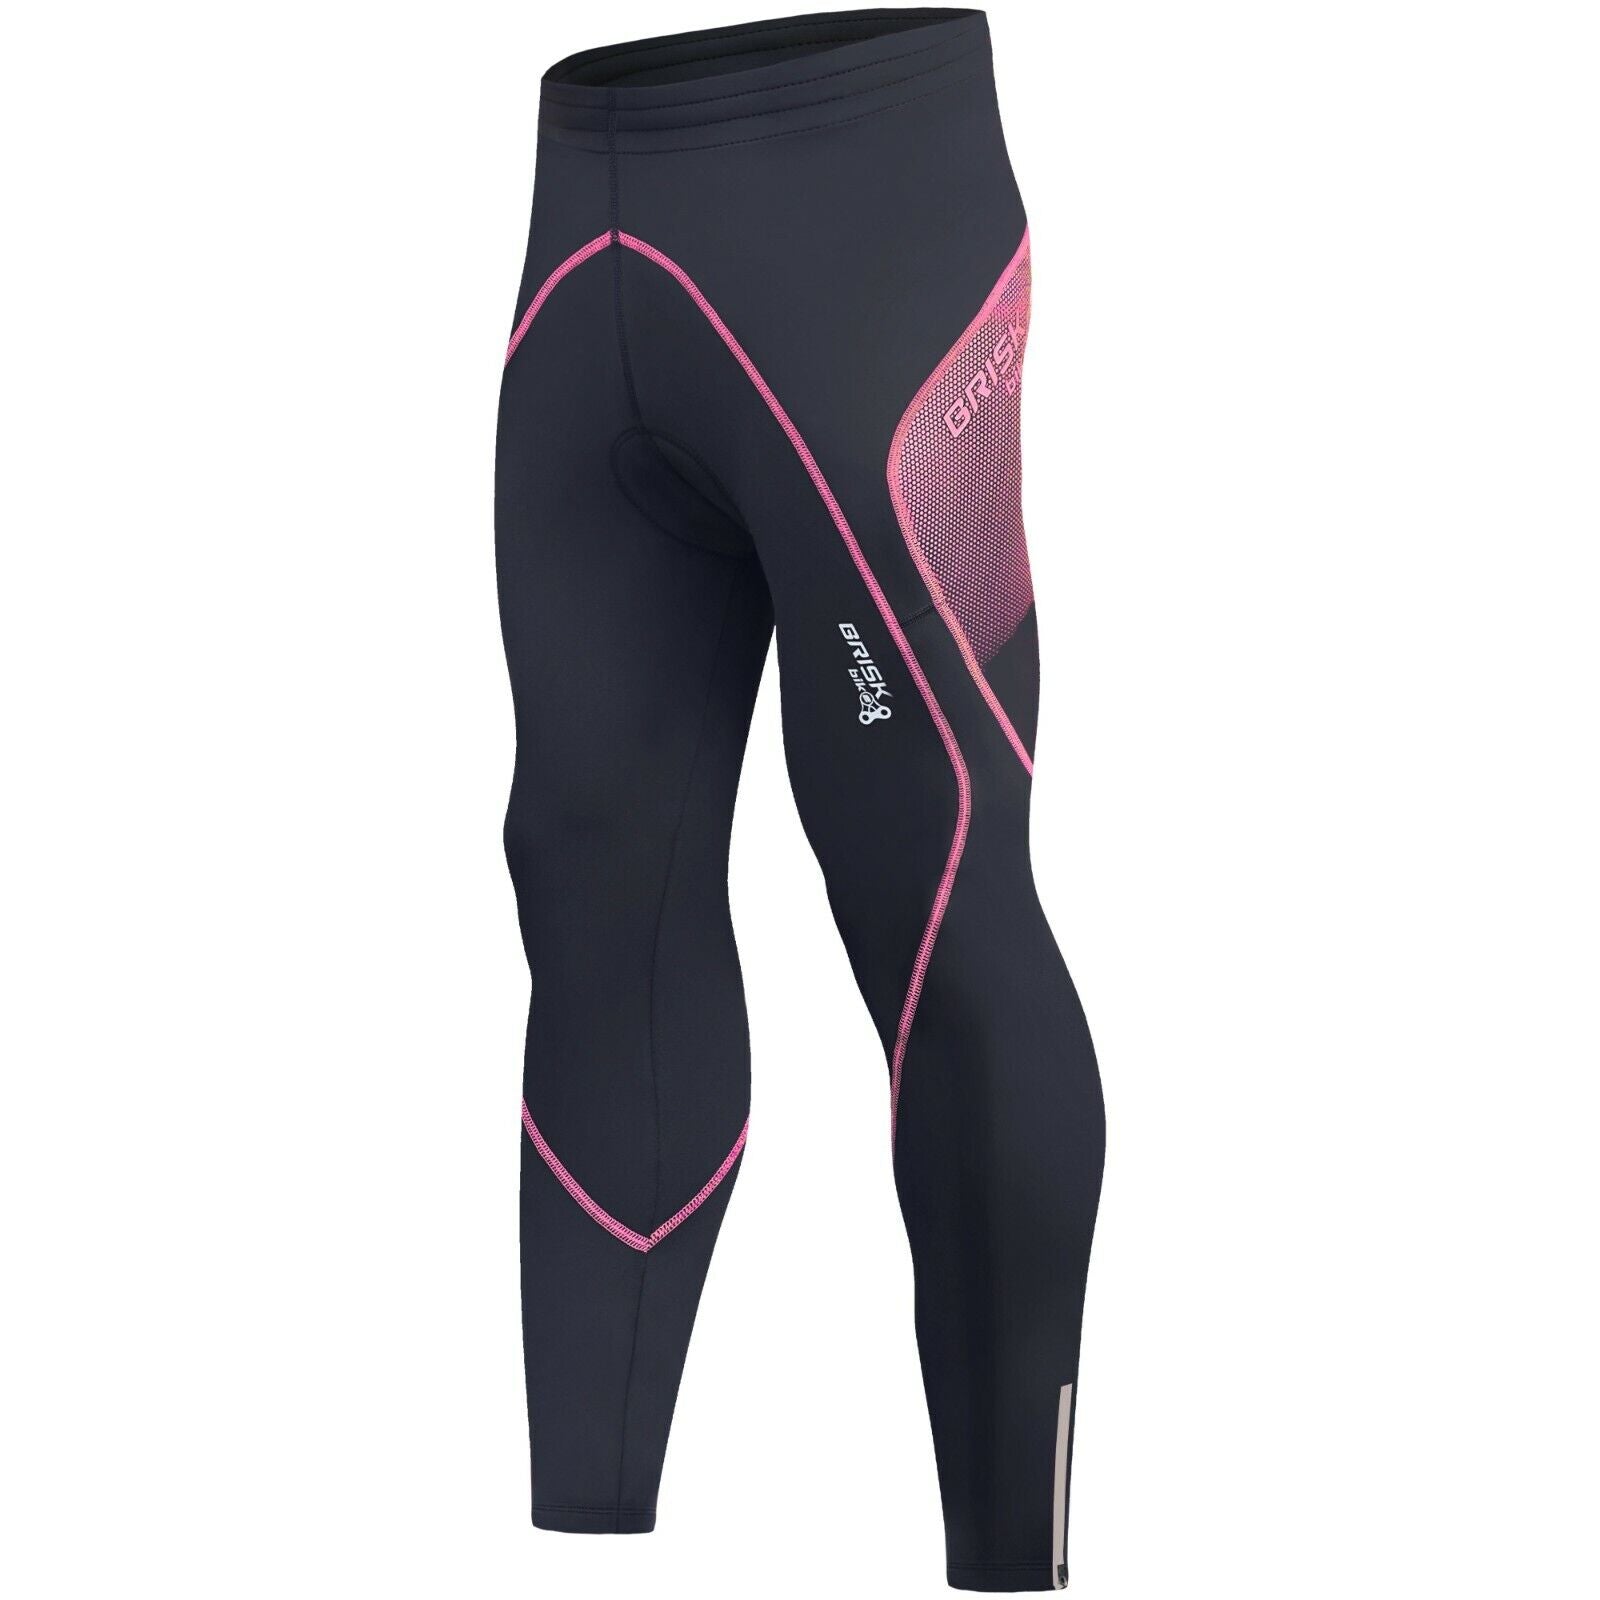 Cycling Trouser Padded Thermal Compression Tights Leggings Women's